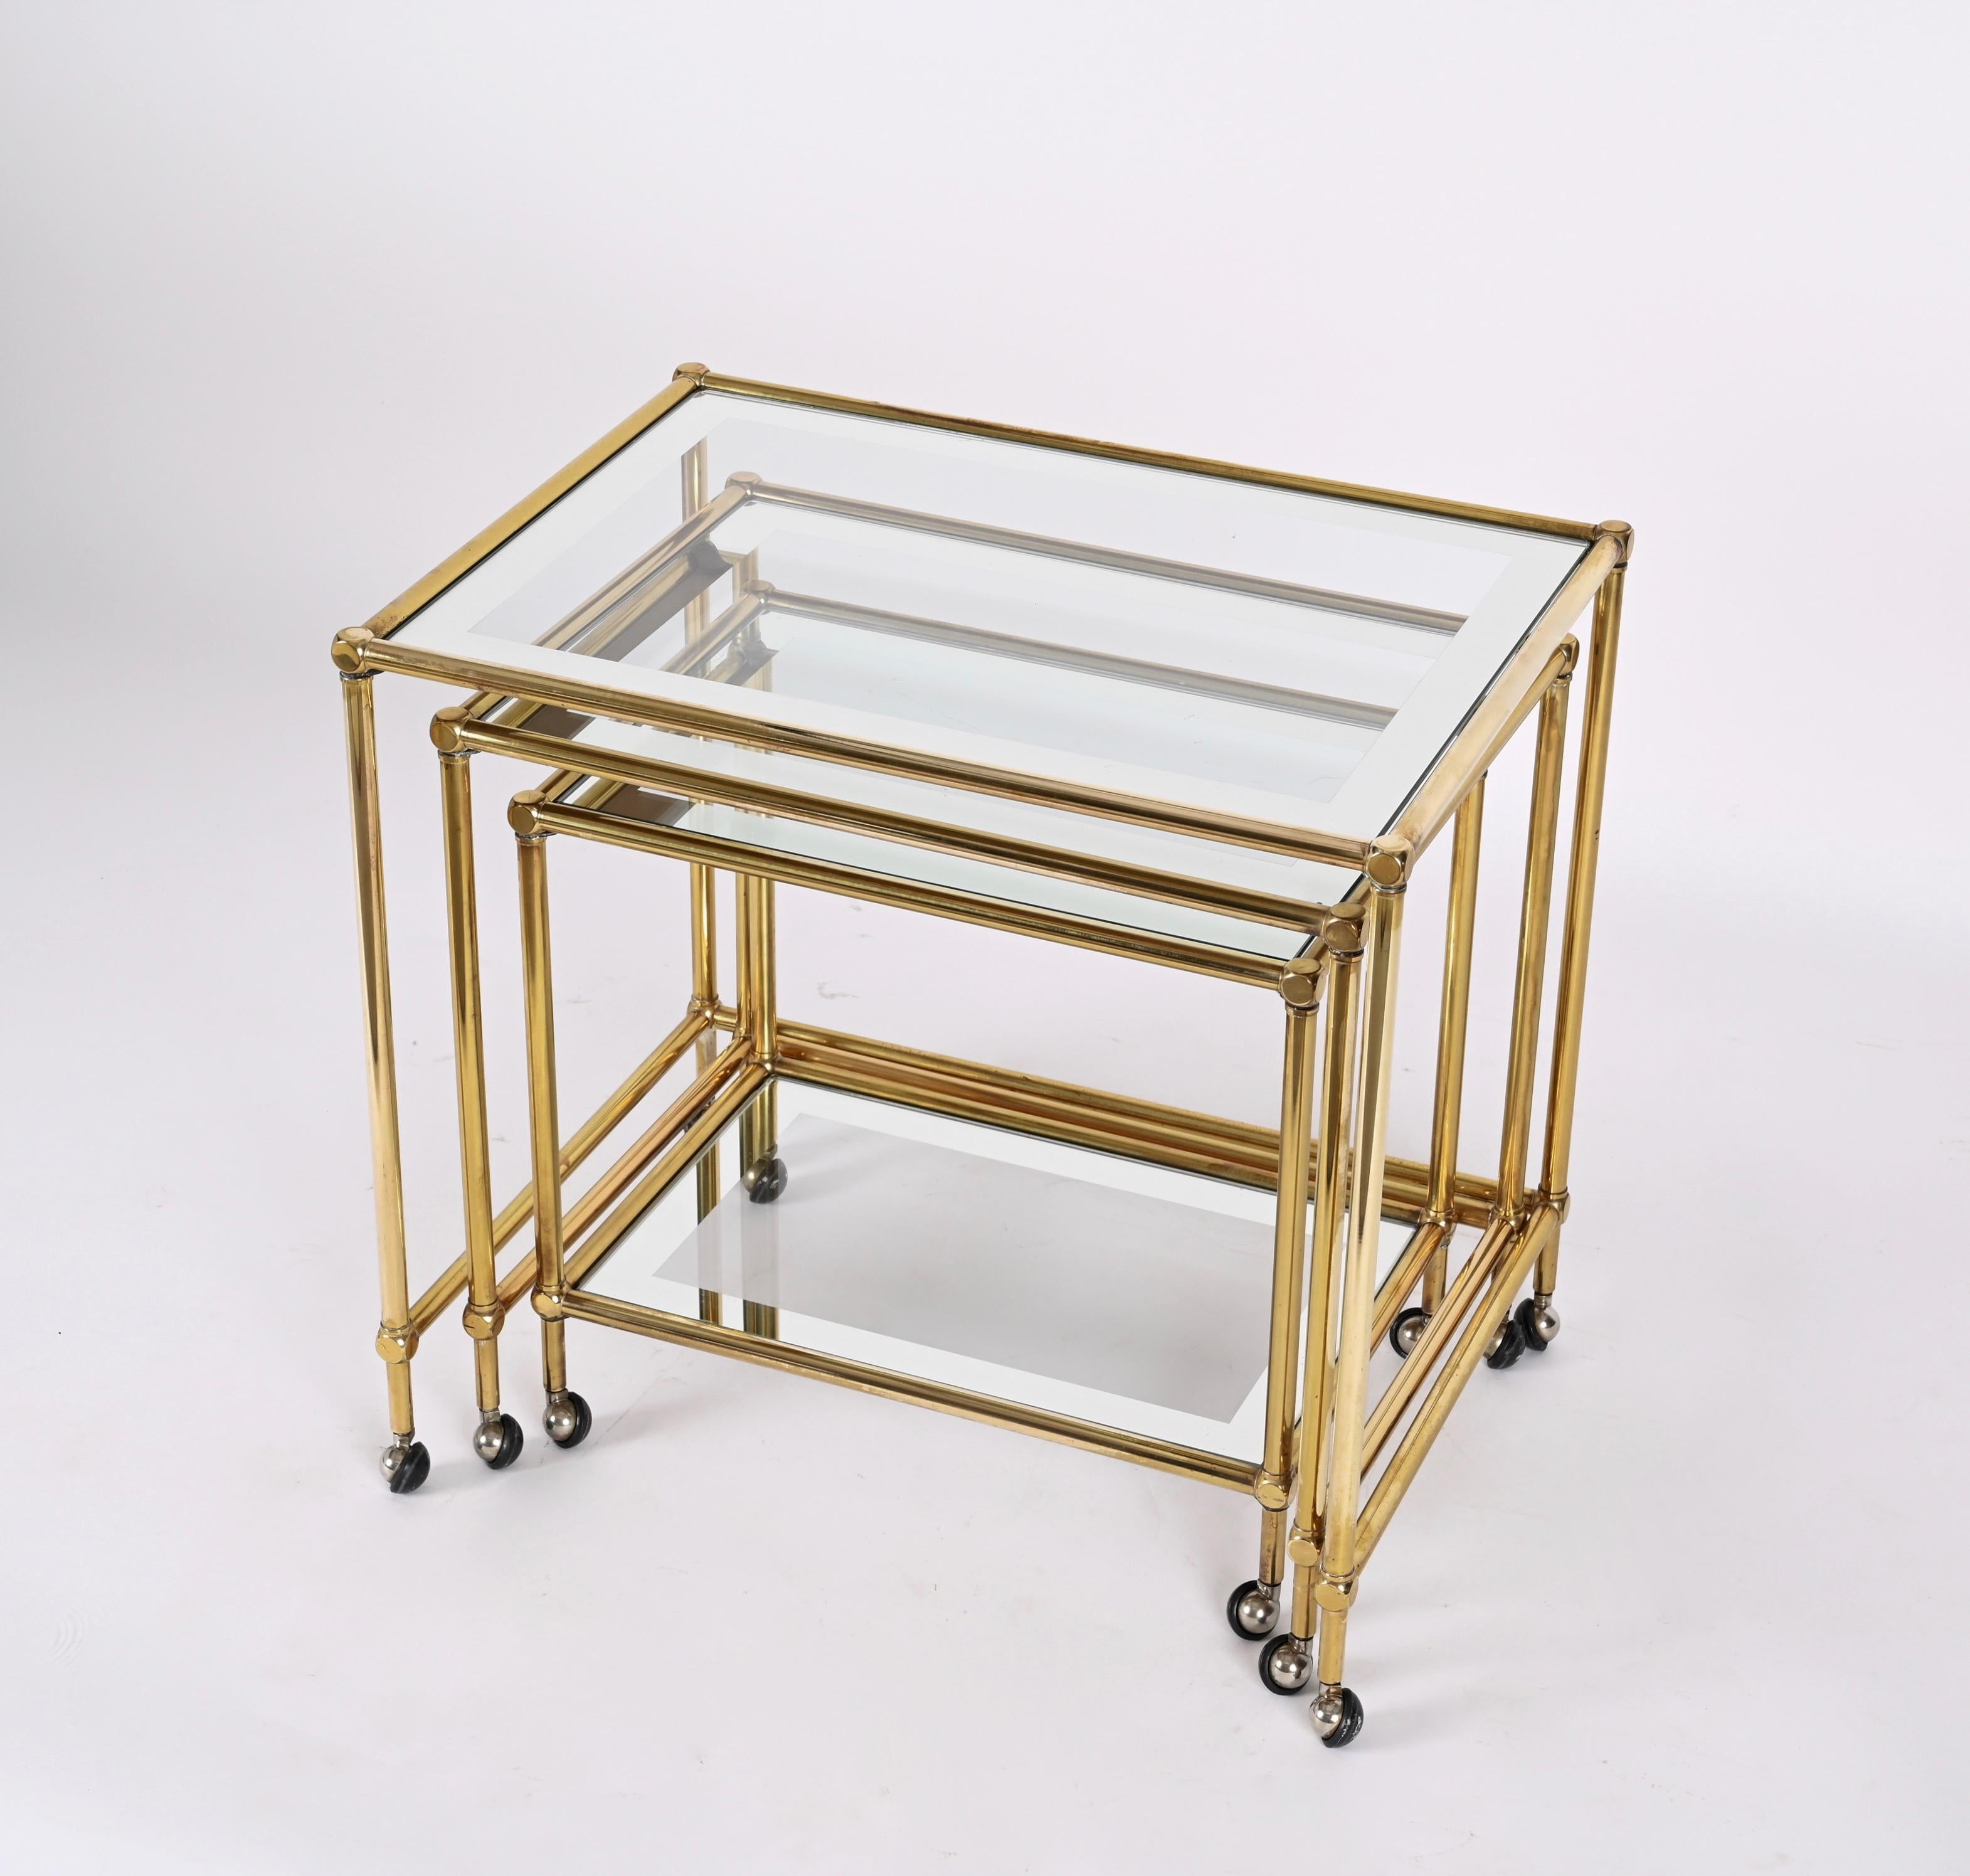 Set of three brass mirrored borders with glass top nesting tables. This fantastic set was designed in France by Maison Jansen during the 1970s.

This set of three small tables with retractable interlocking wheels, glass shelves and a mirror edge